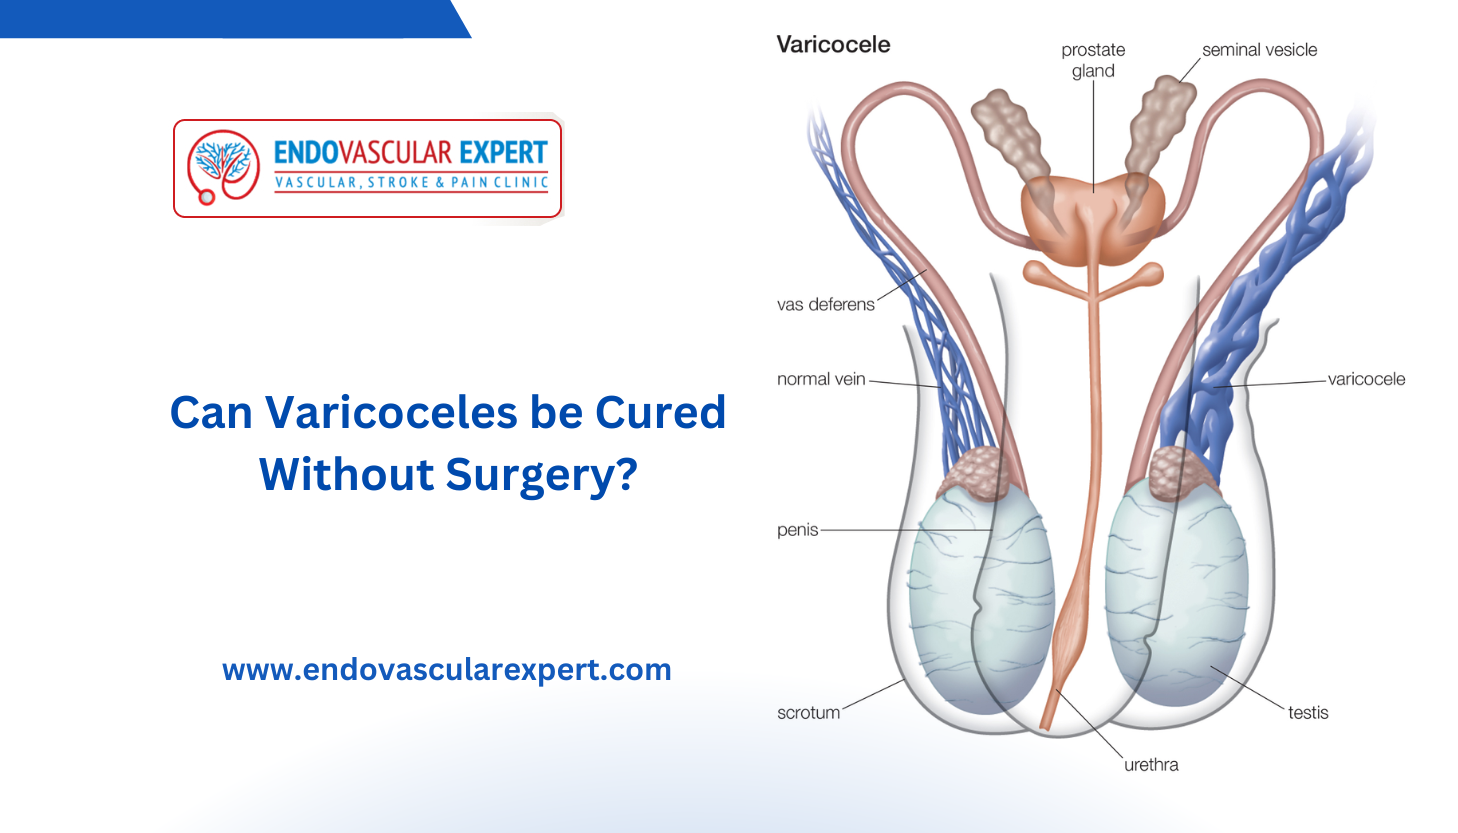 Can Varicoceles be Cured Without Surgery